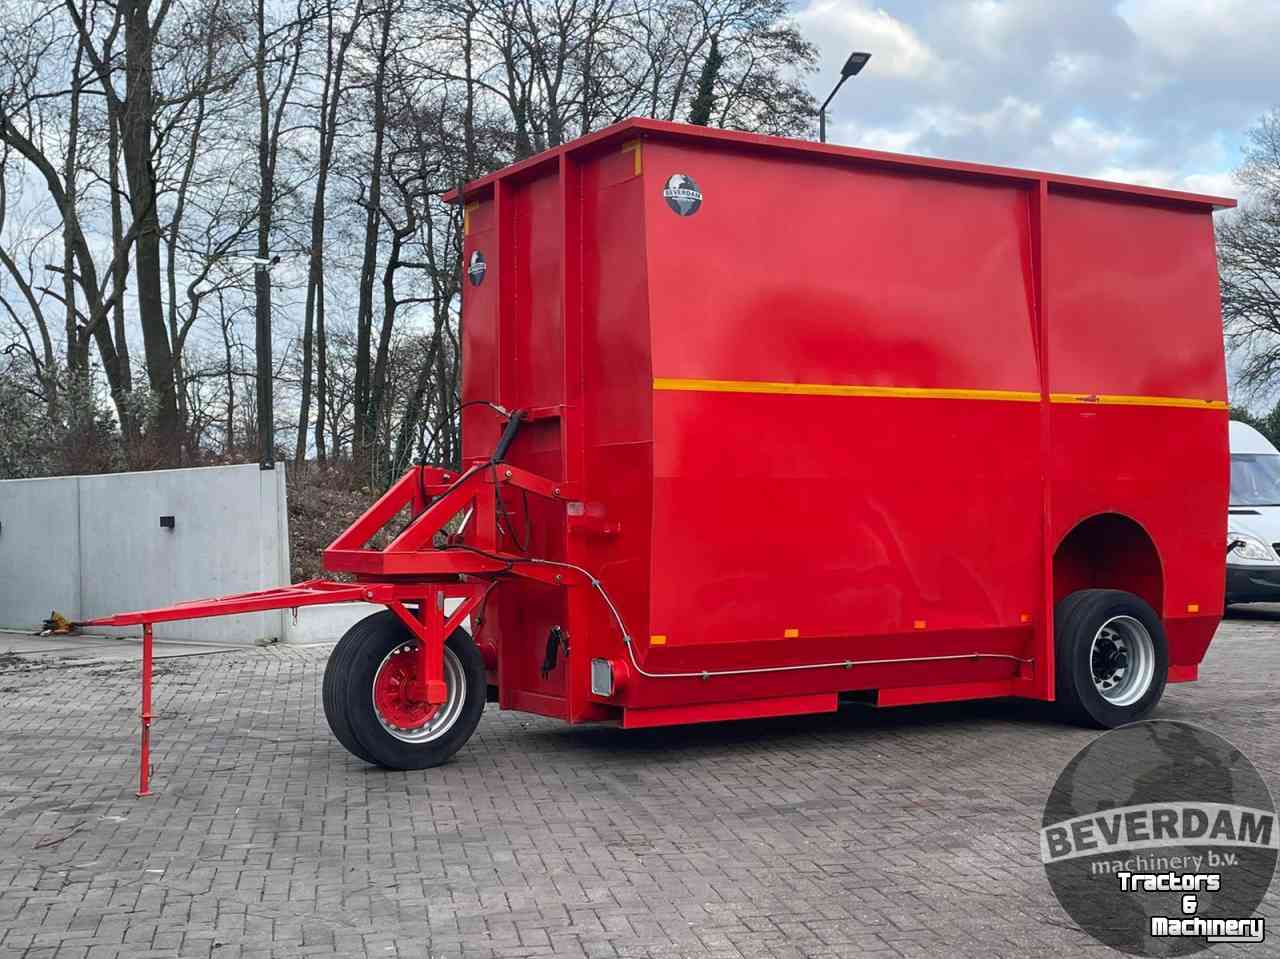 Manure container  hommes HC3200 mestcontainer